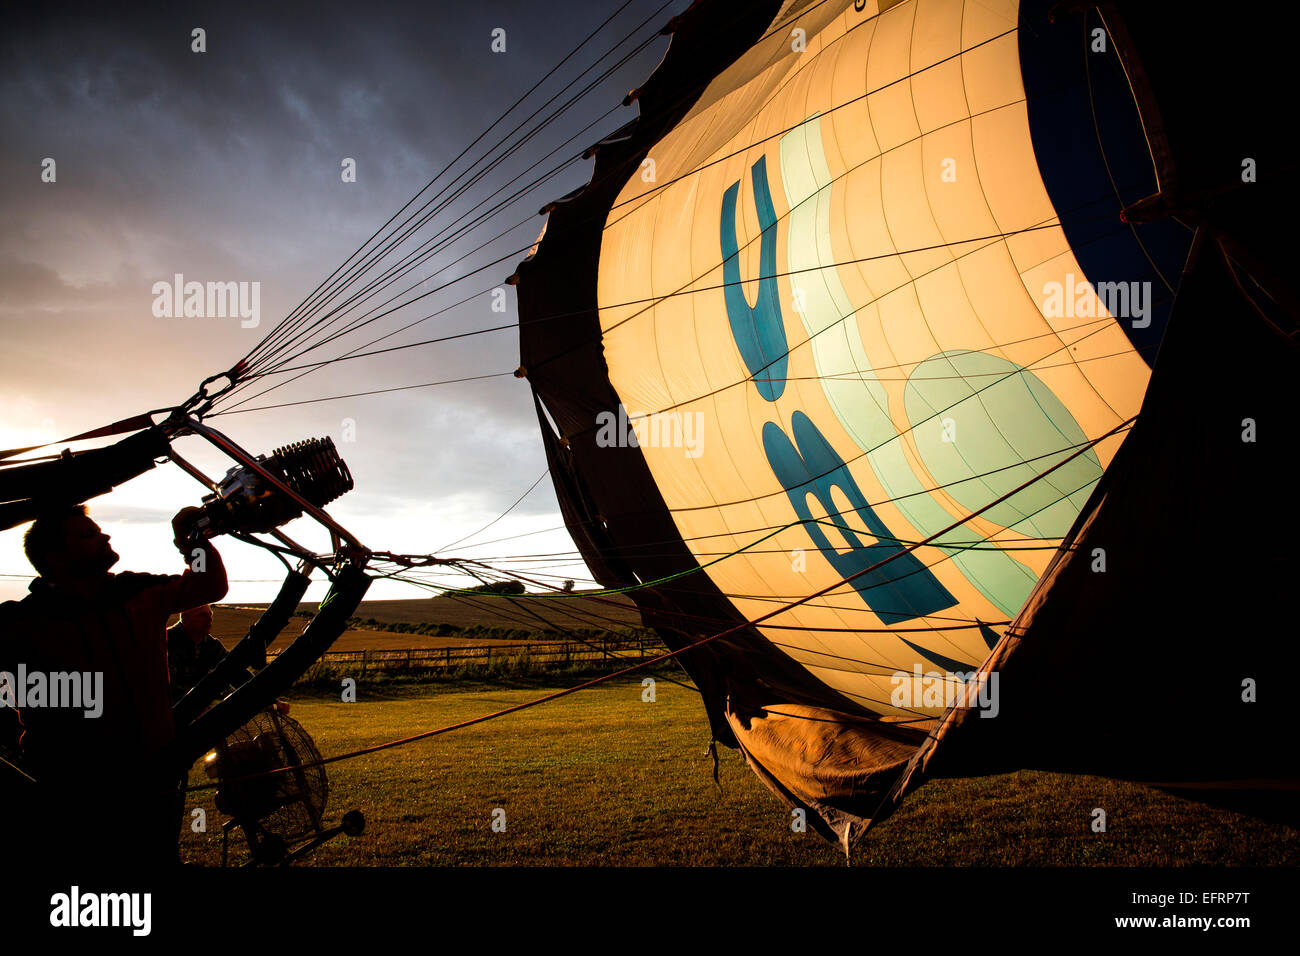 Man inflating hot air balloon at sunset, South Oxfordshire, England Stock Photo